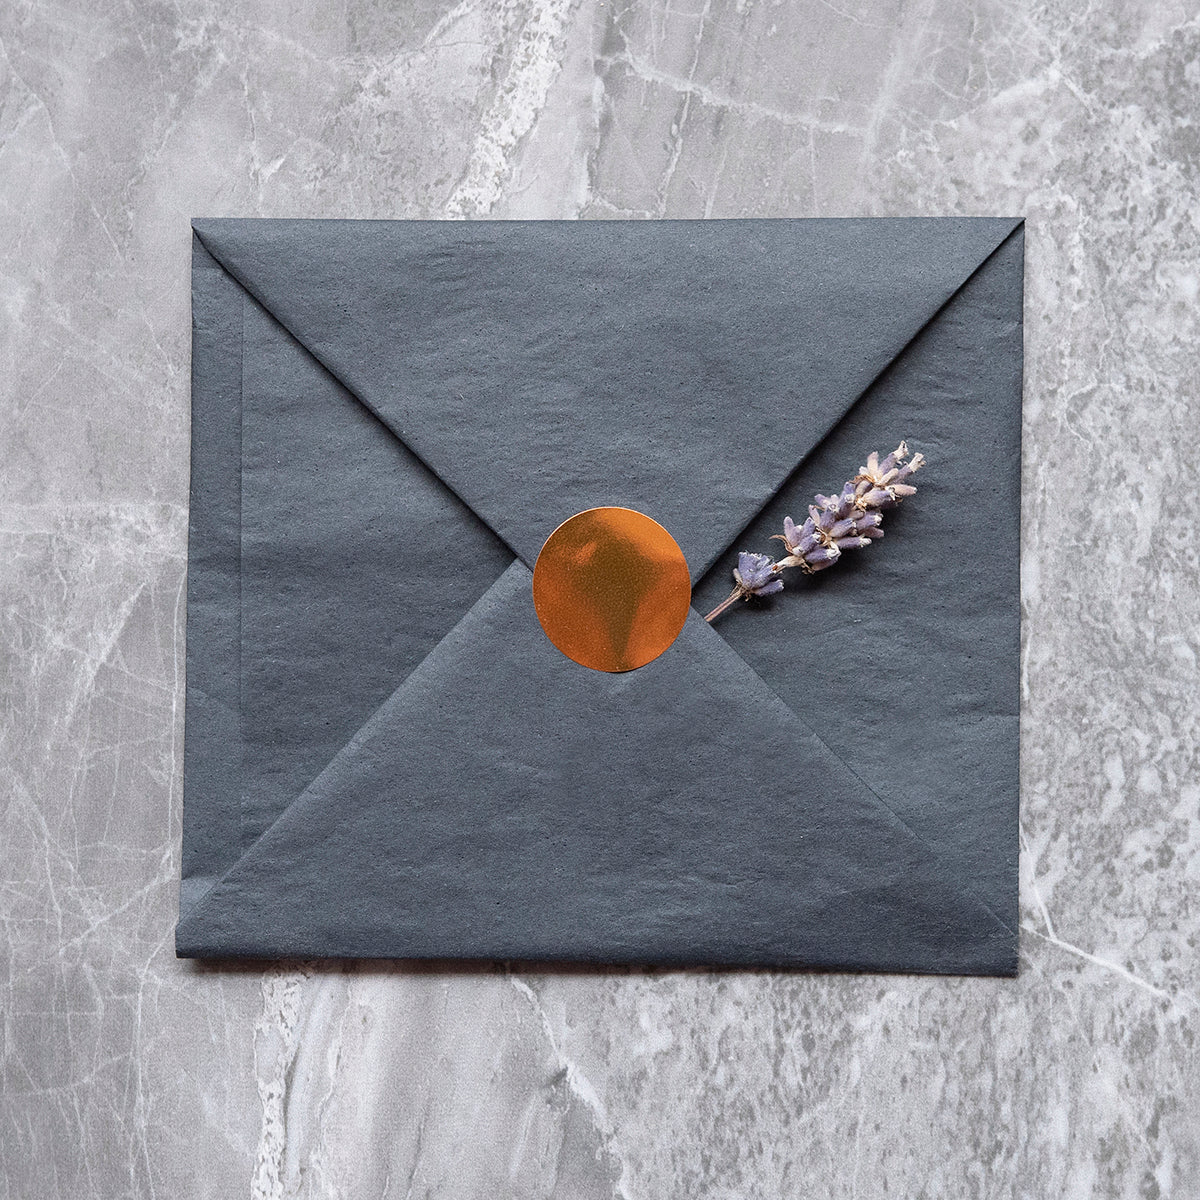 A dark gray envelope sealed with a copper-colored sticker and decorated with a sprig of lavender, placed on a marble surface, conveying an elegant and serene correspondence theme.